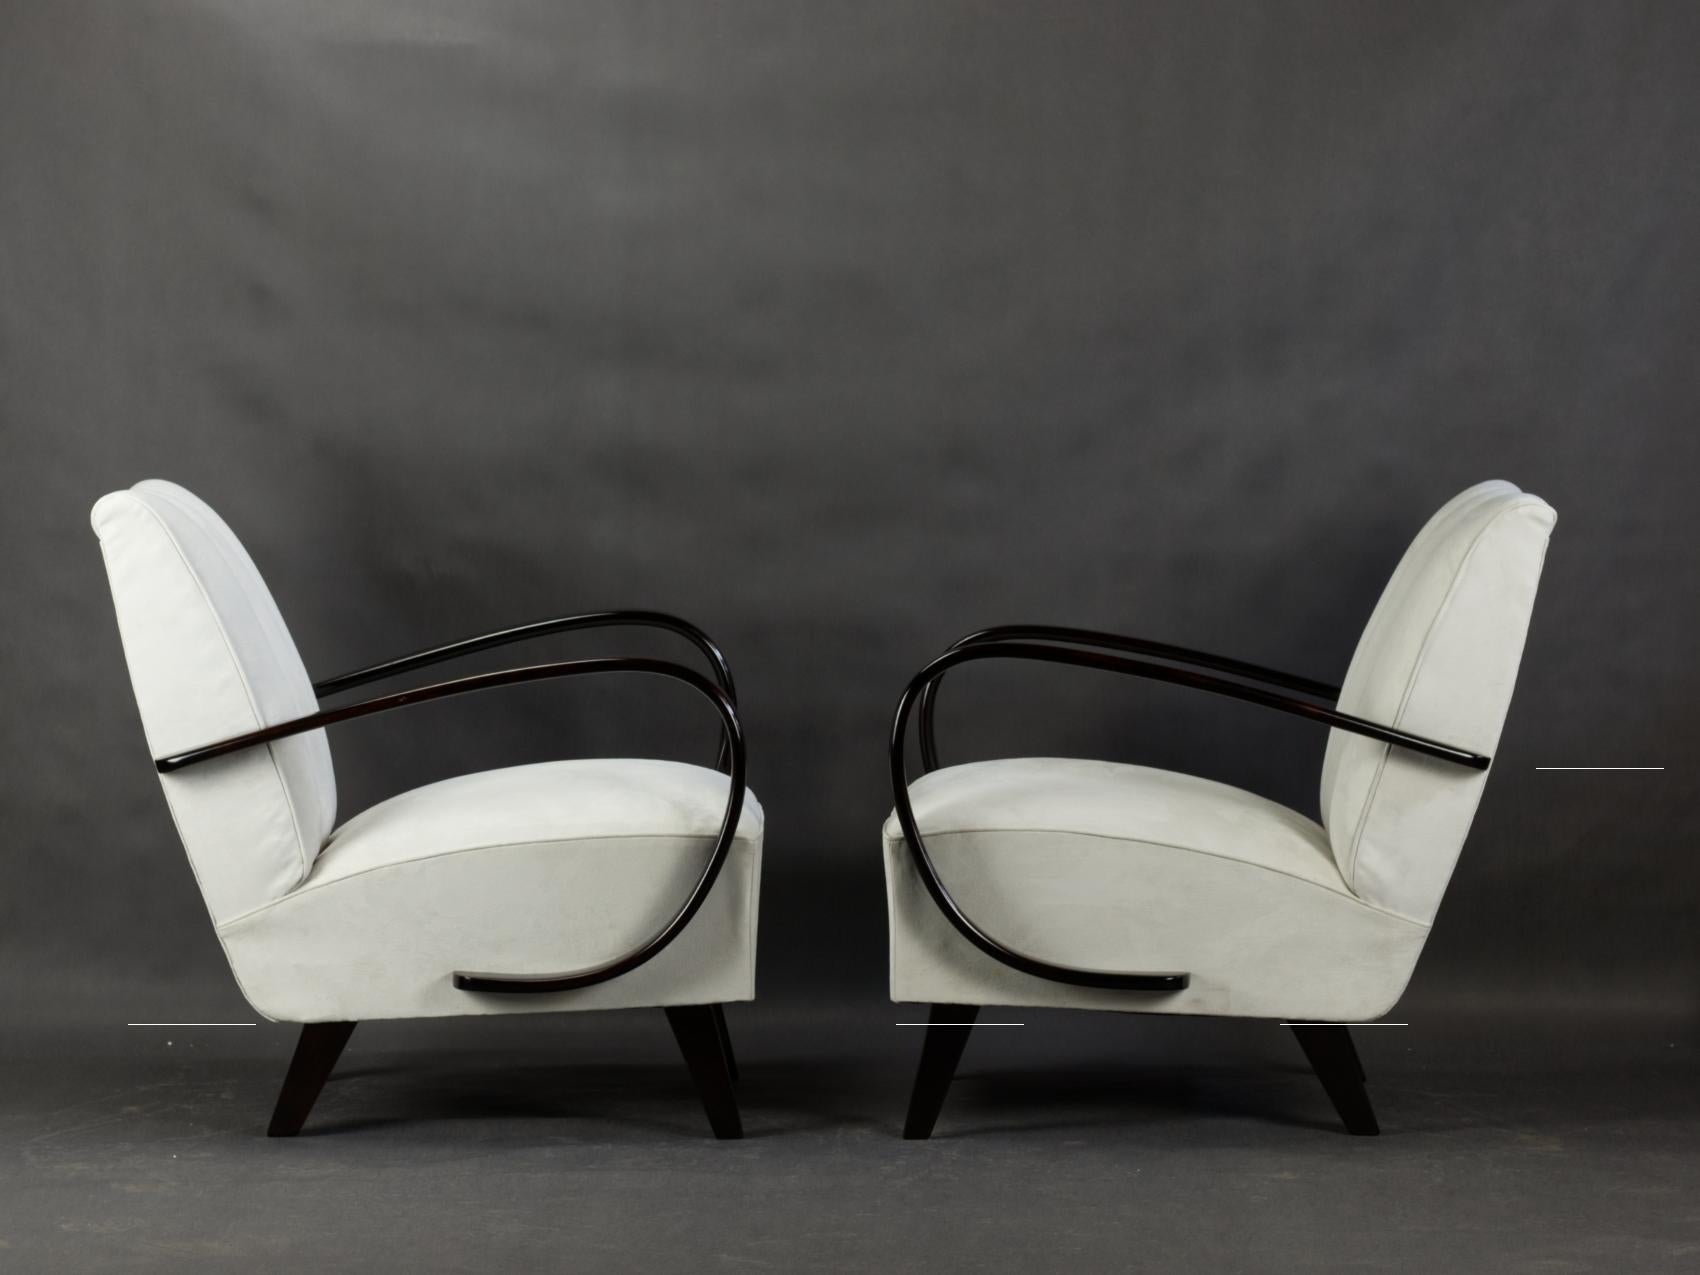 Pair of Armchairs by Jindrich Halabala, 1950s For Sale 1